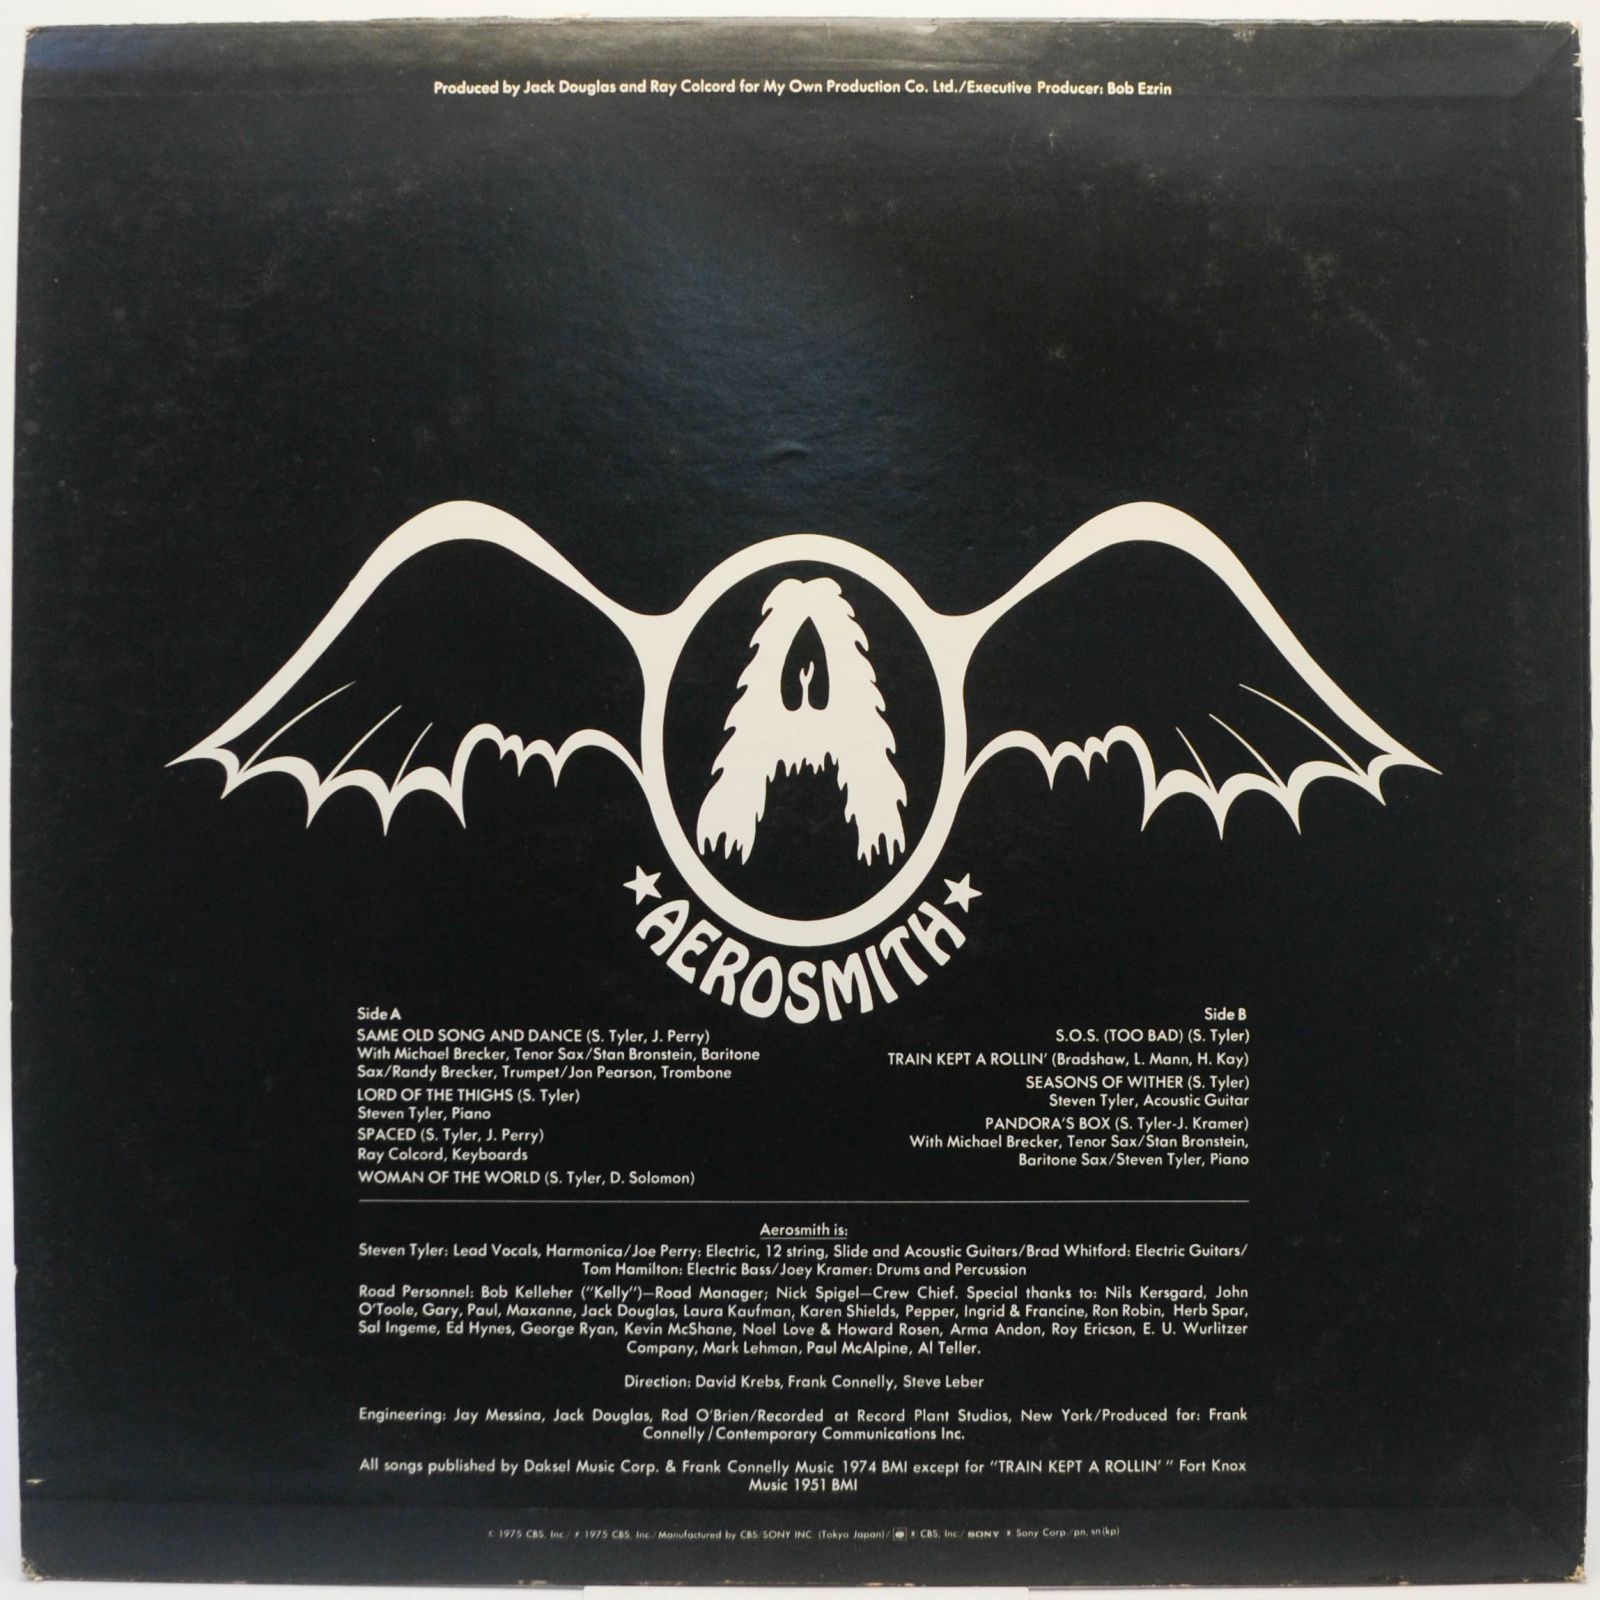 Aerosmith — Get Your Wings, 1975